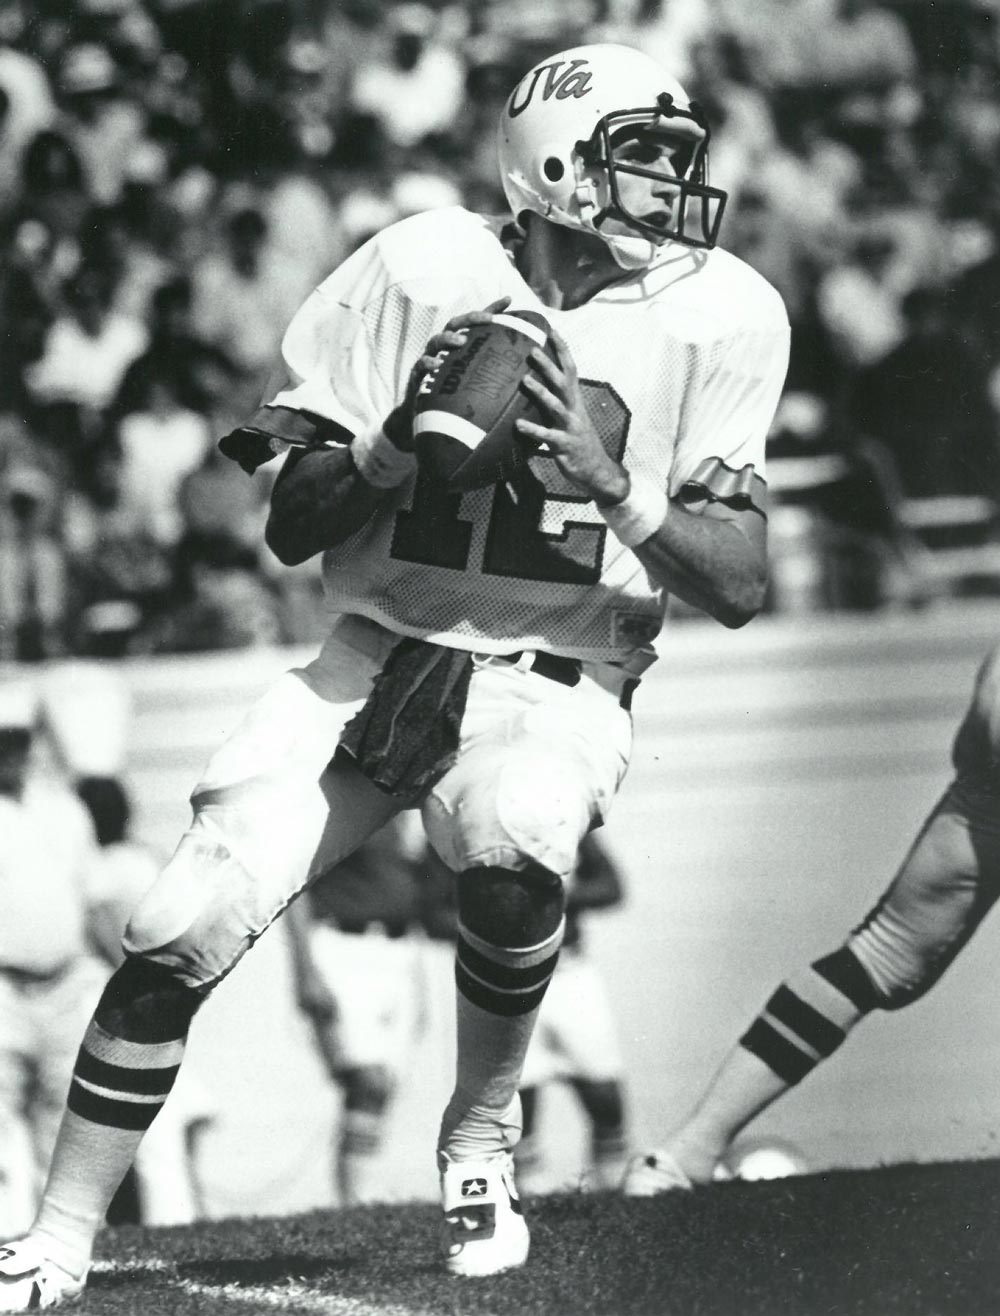 black and white photo of Schuchts in football uniform preparing to throw the ball